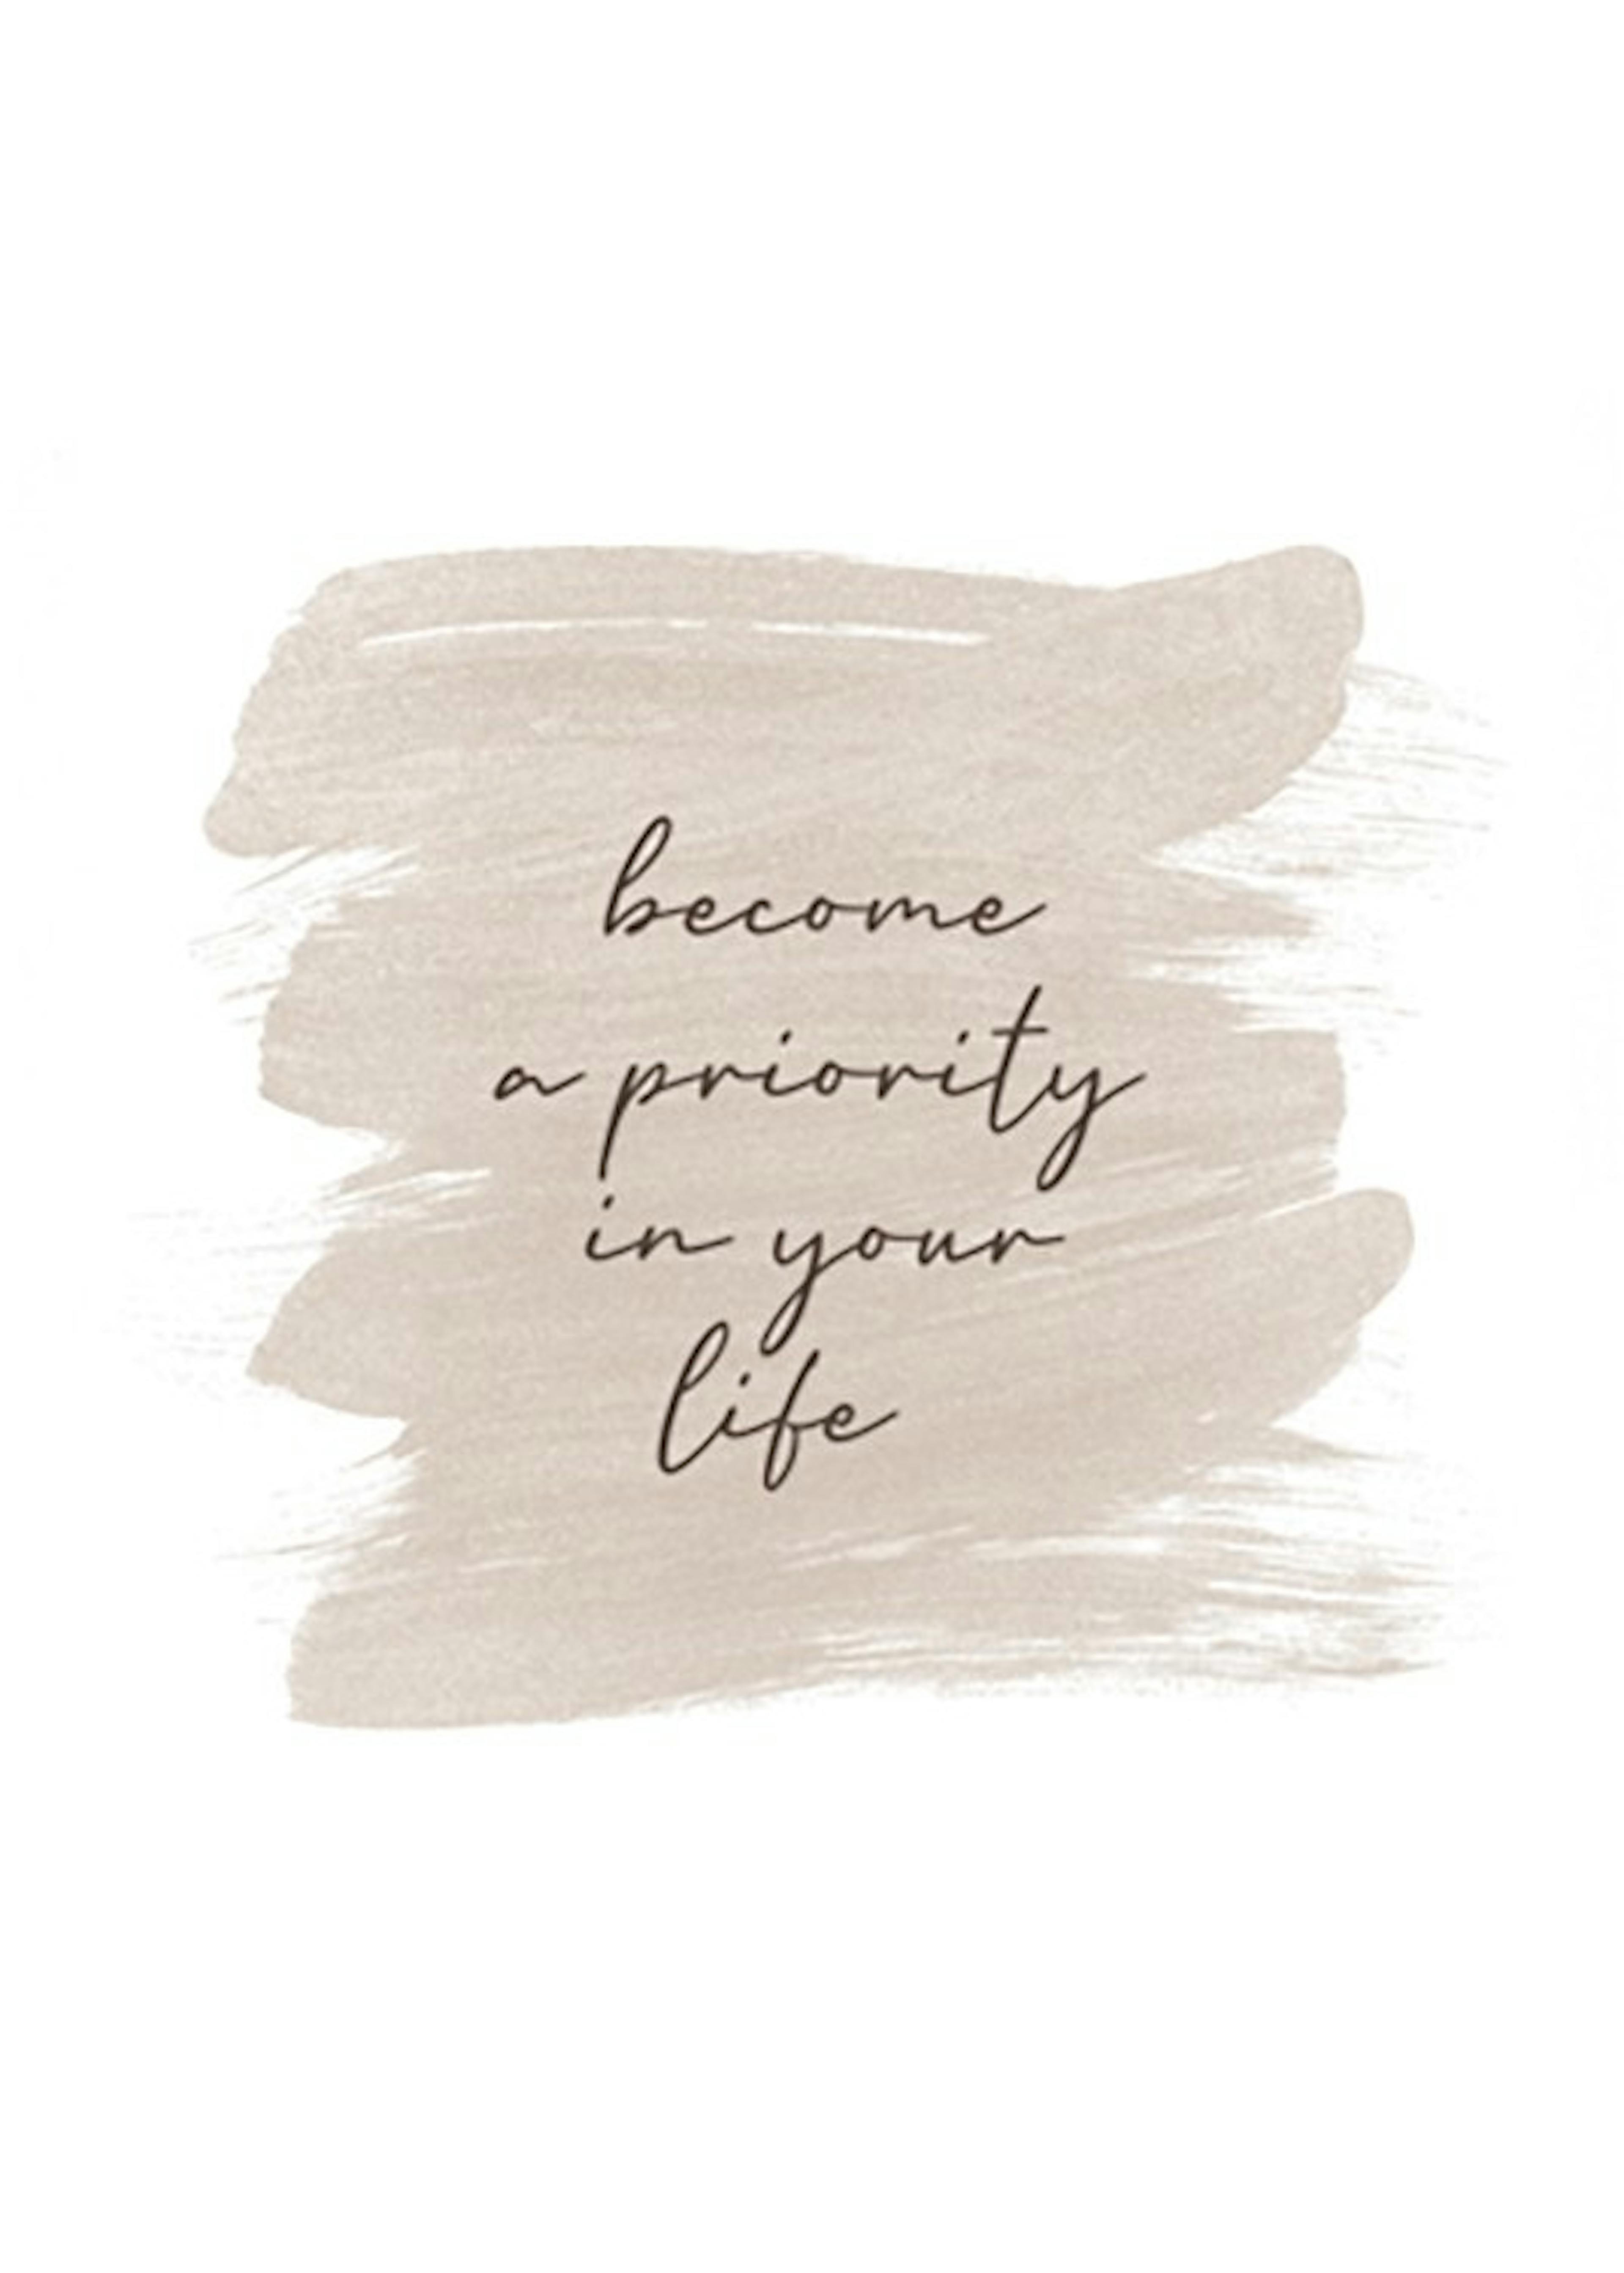 Become A Priority Plakat 0